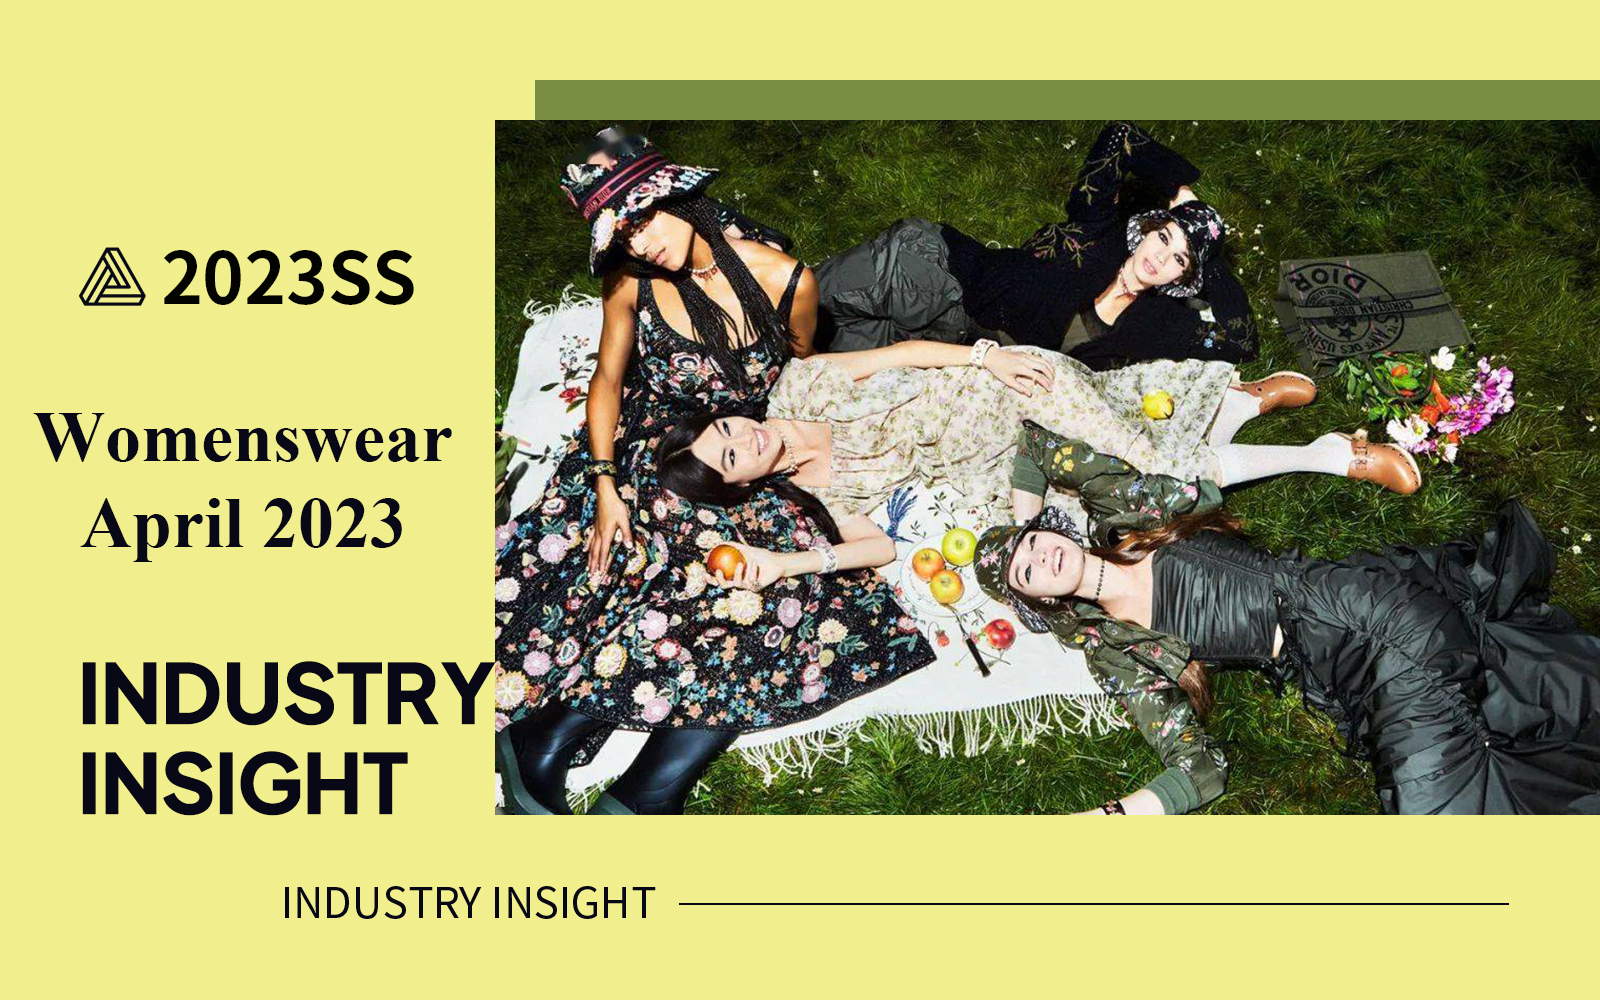 April 2023 -- The Industry Insight of Womenswear